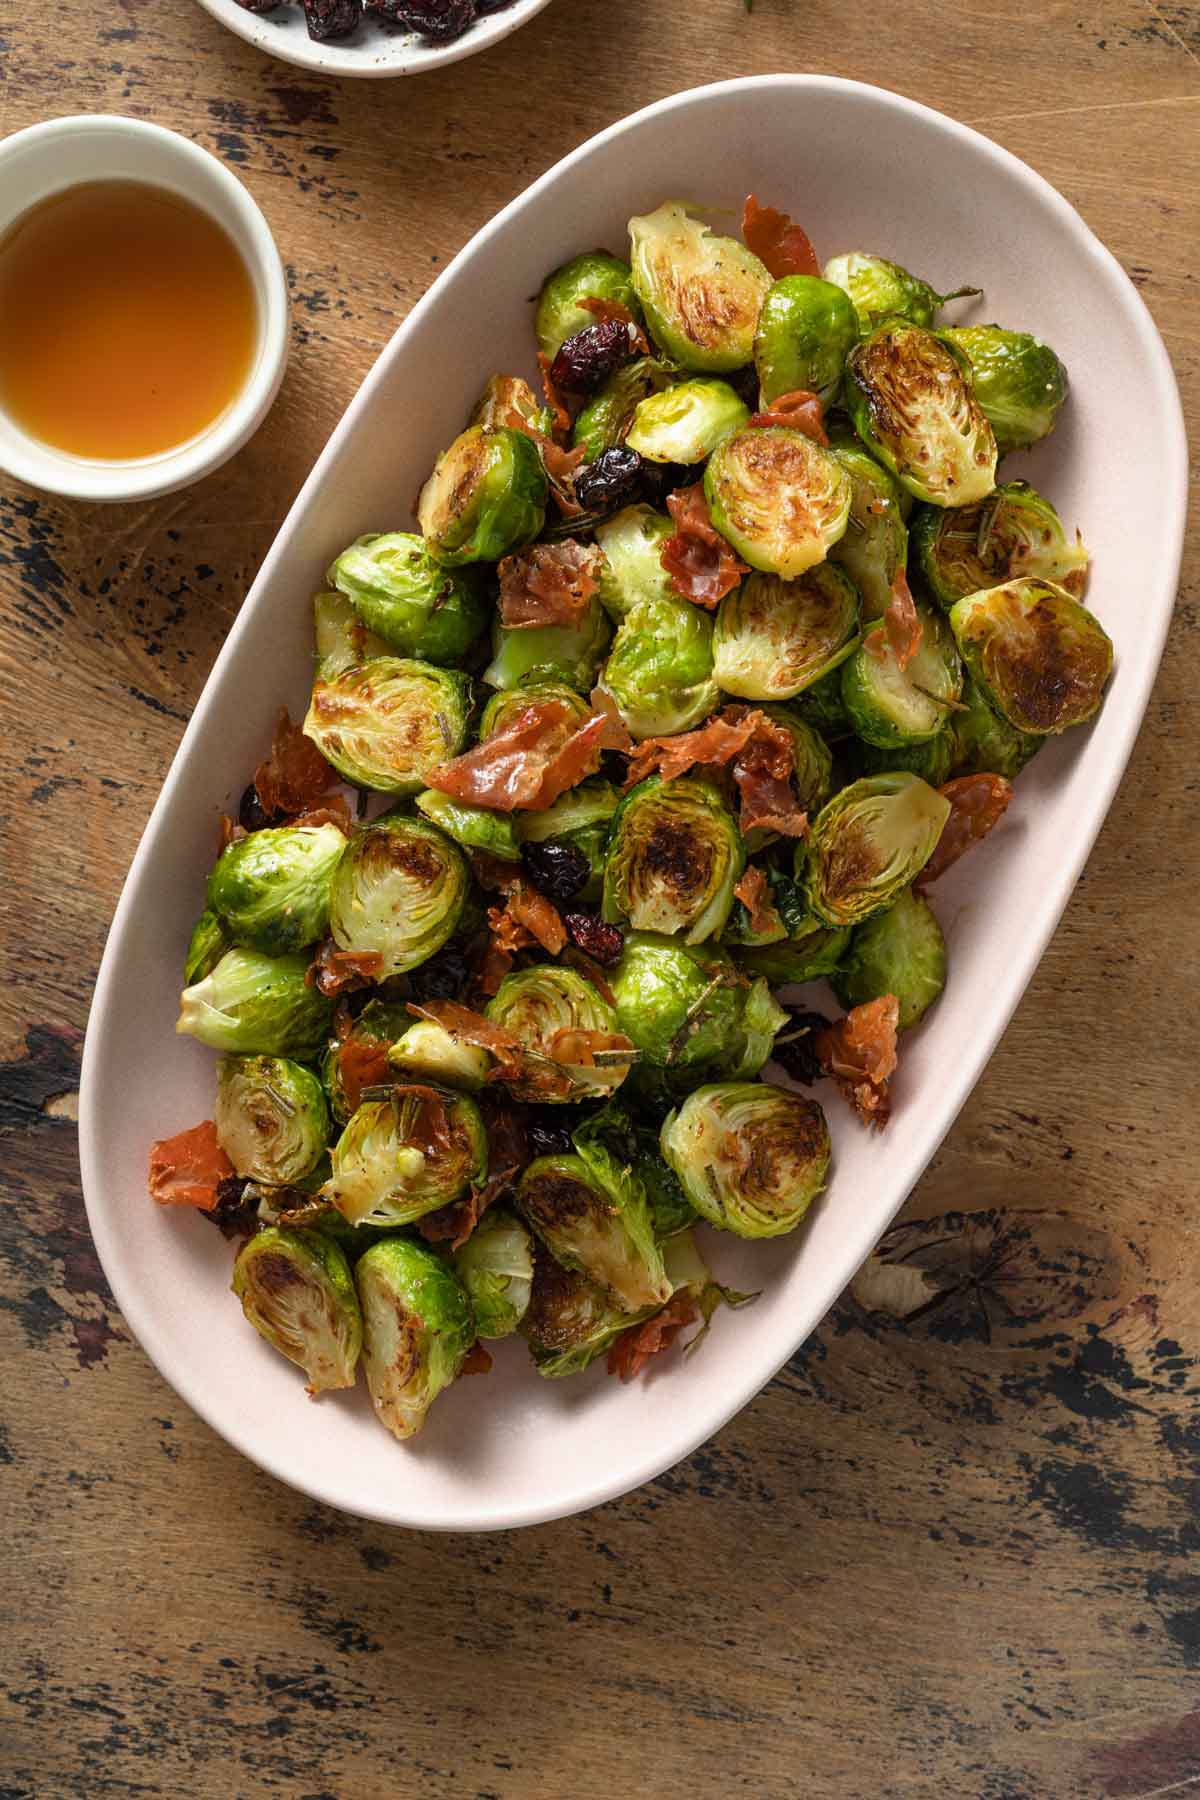 Prosciutto Brussels sprouts tossed with maple syrup and dried cranberries in a serving dish.